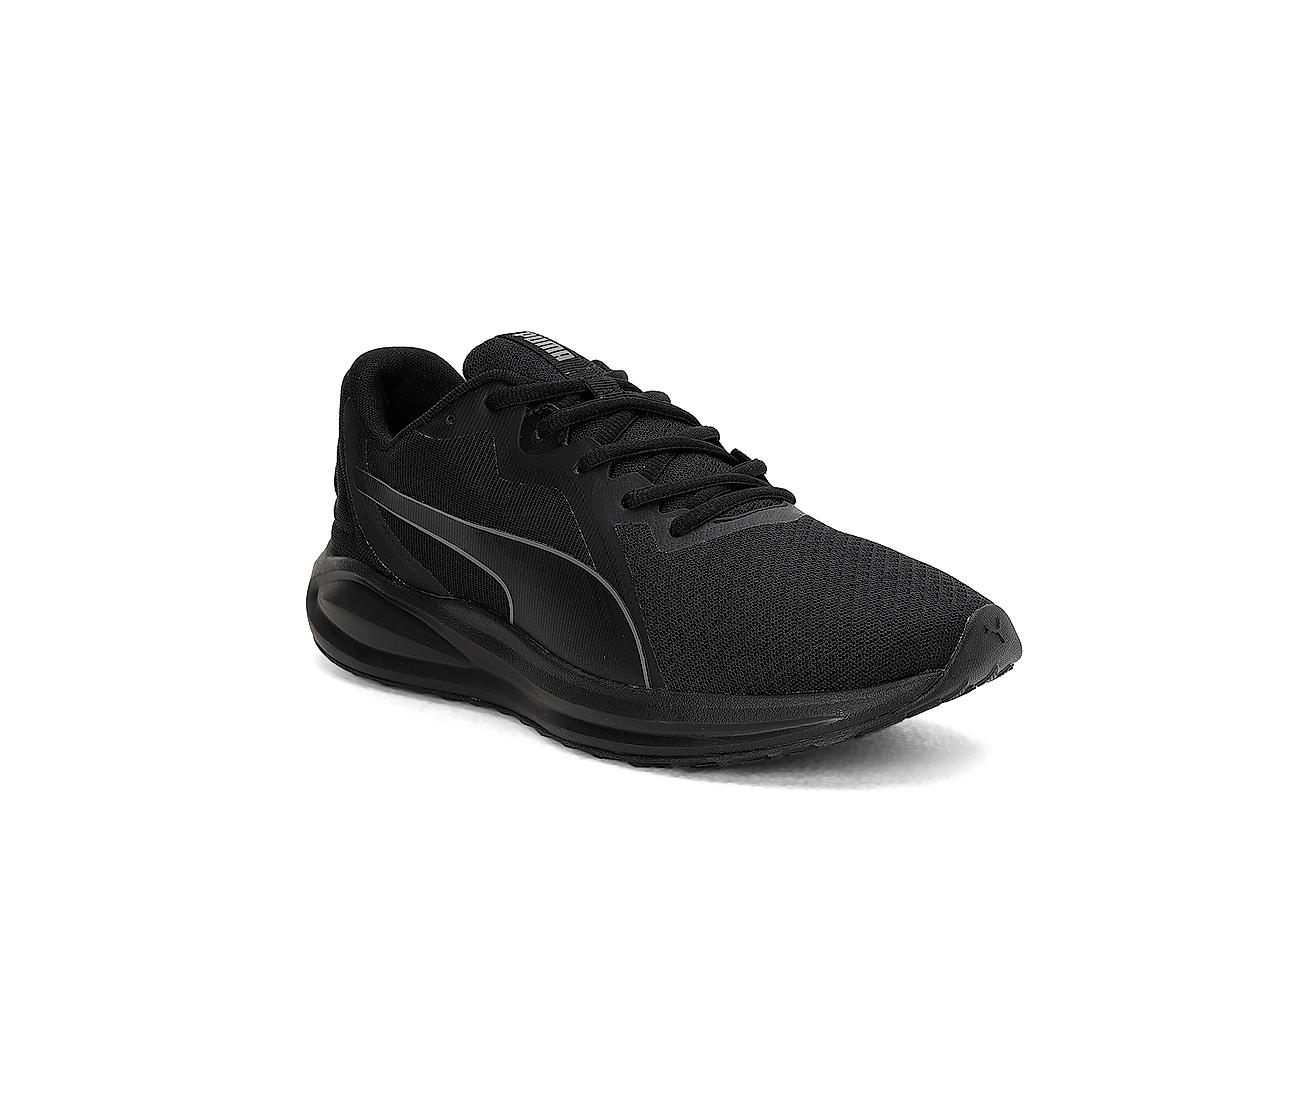 Puma Black Wired Sneakers - Buy Puma Black Wired Sneakers online in India